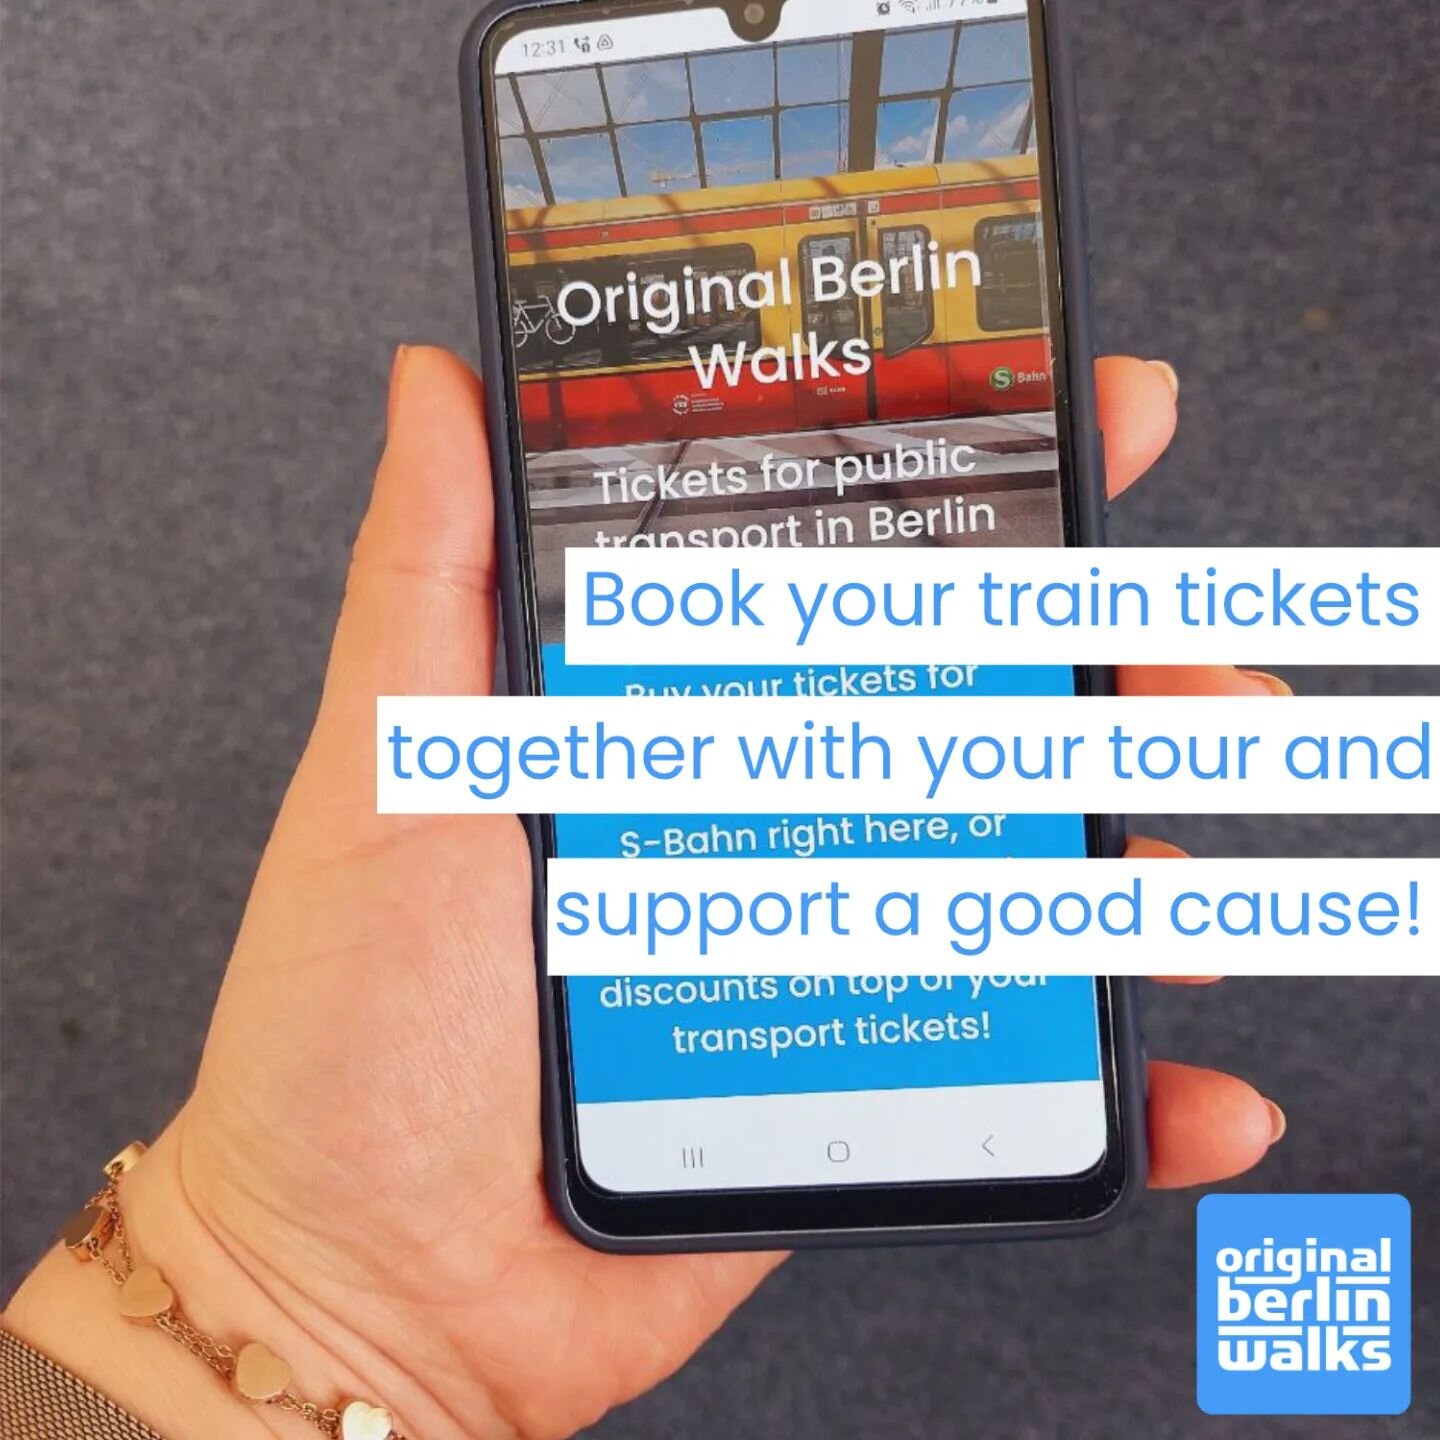 New: Book your train tickets for Berlin directly on our website. Convenient for our clients - and great for our charity work: all commission made through these ticket sales will go directly to our social projects! Find out more on www.berlinwalks.com